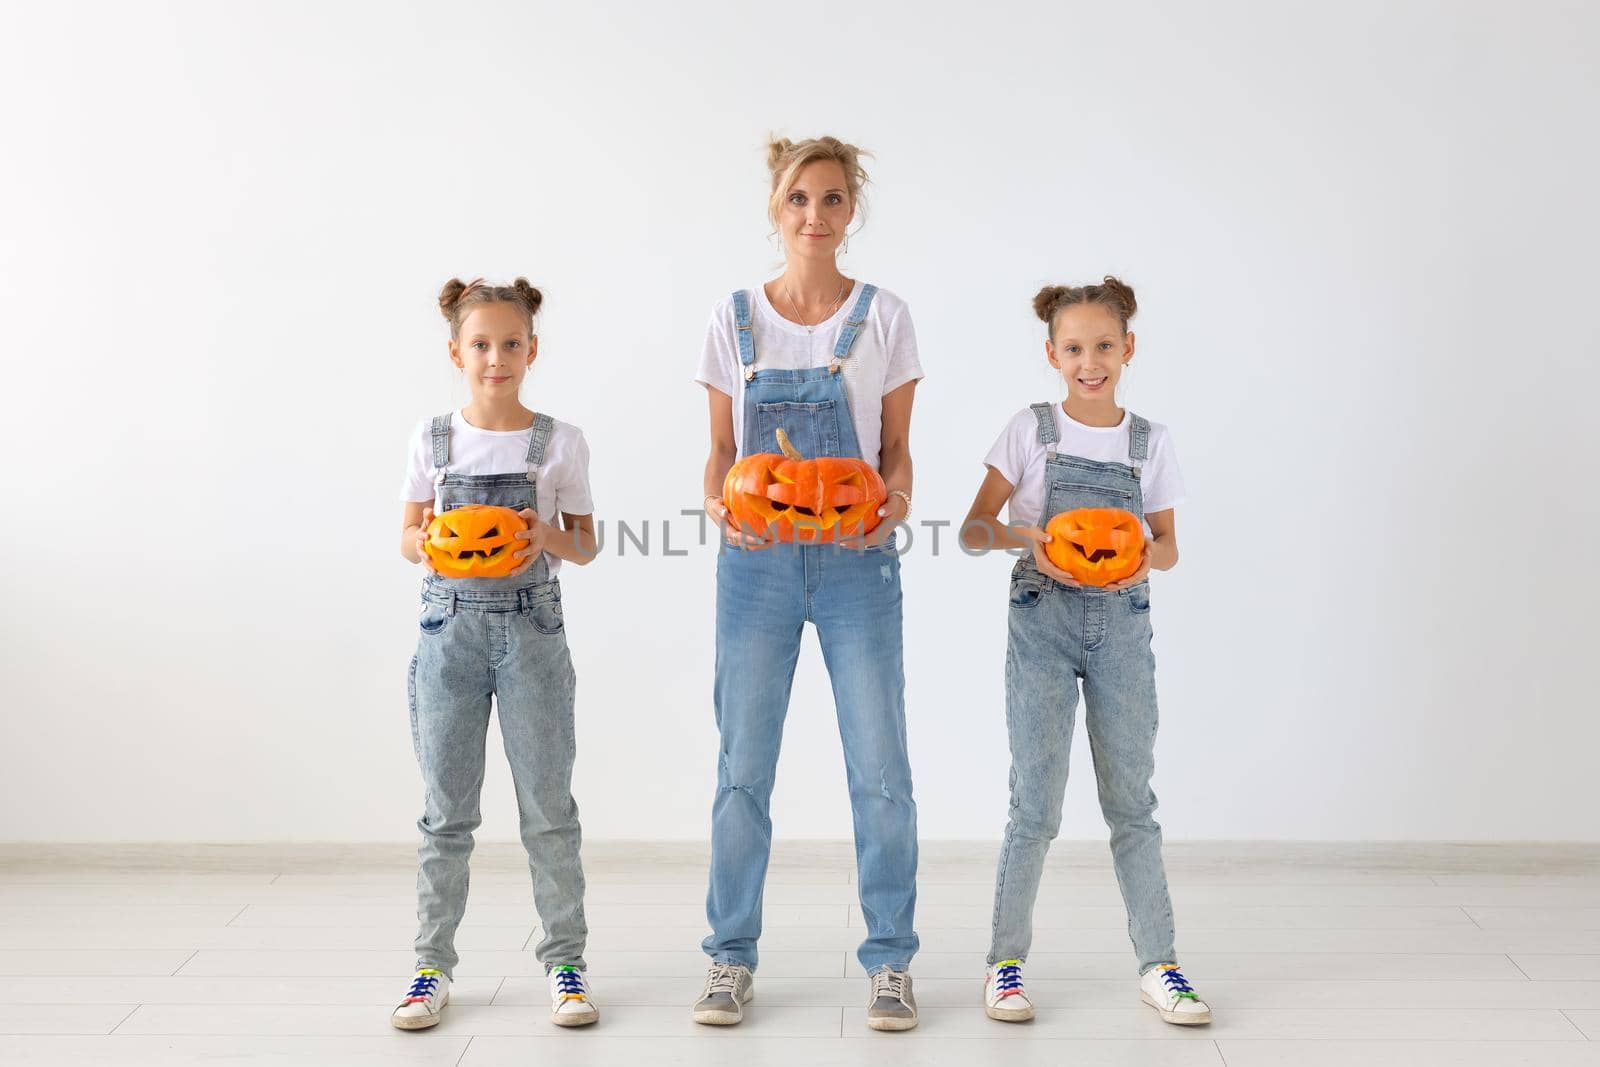 Happy halloween and holidays concept - A mother and her daughters with pumpkins. Happy family preparing for Halloween. by Satura86